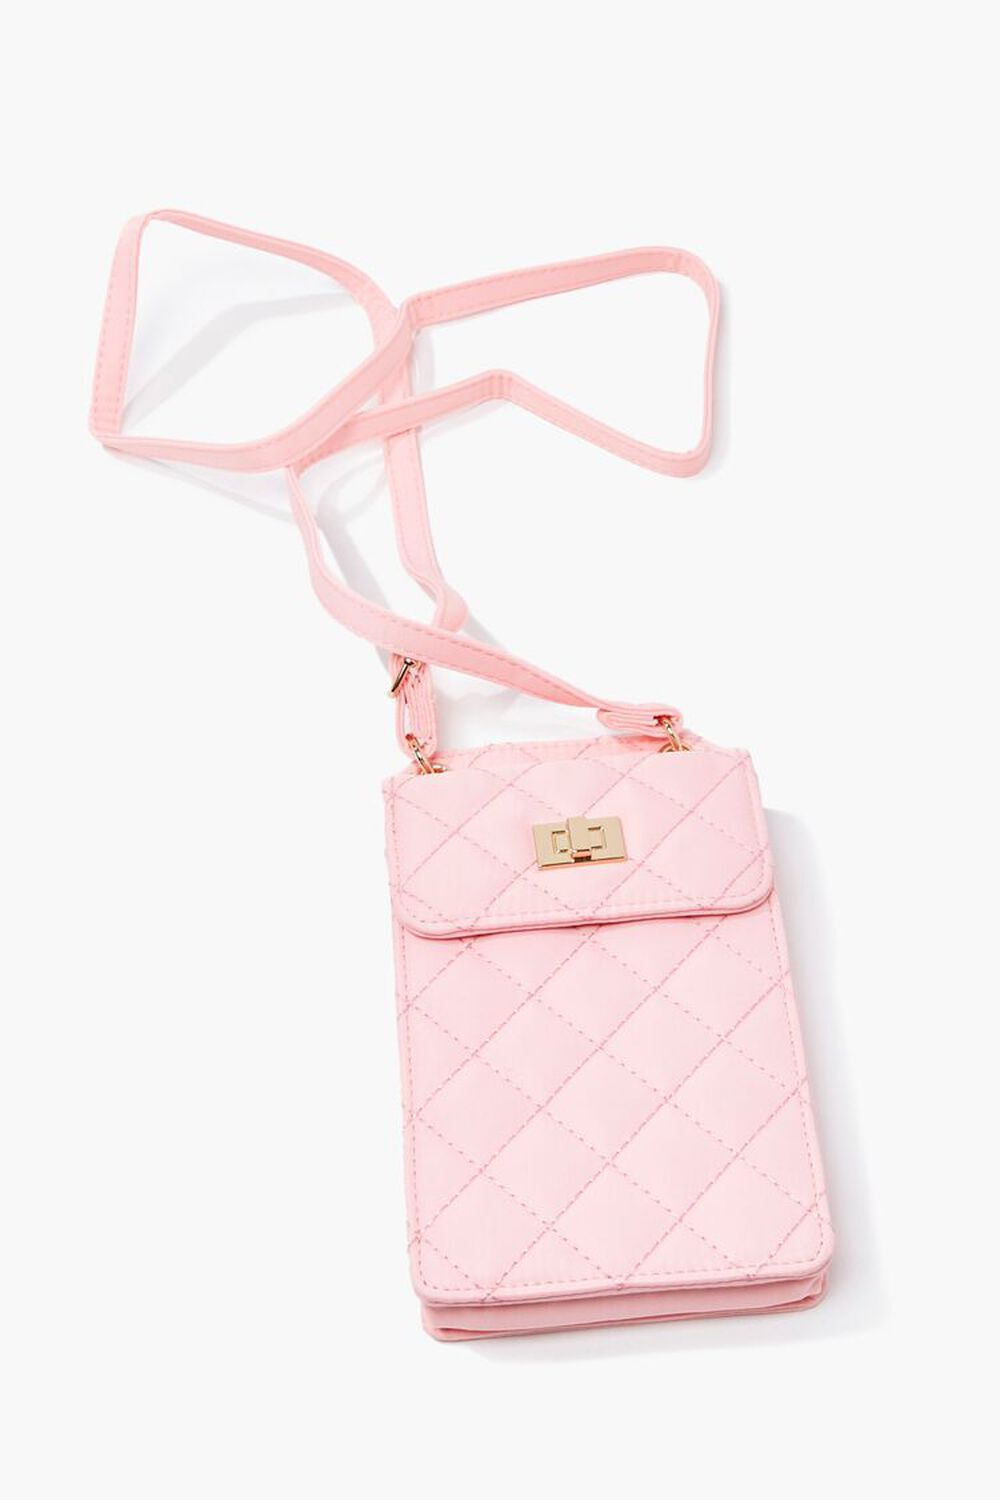 PINK Quilted Crossbody Bag, image 3